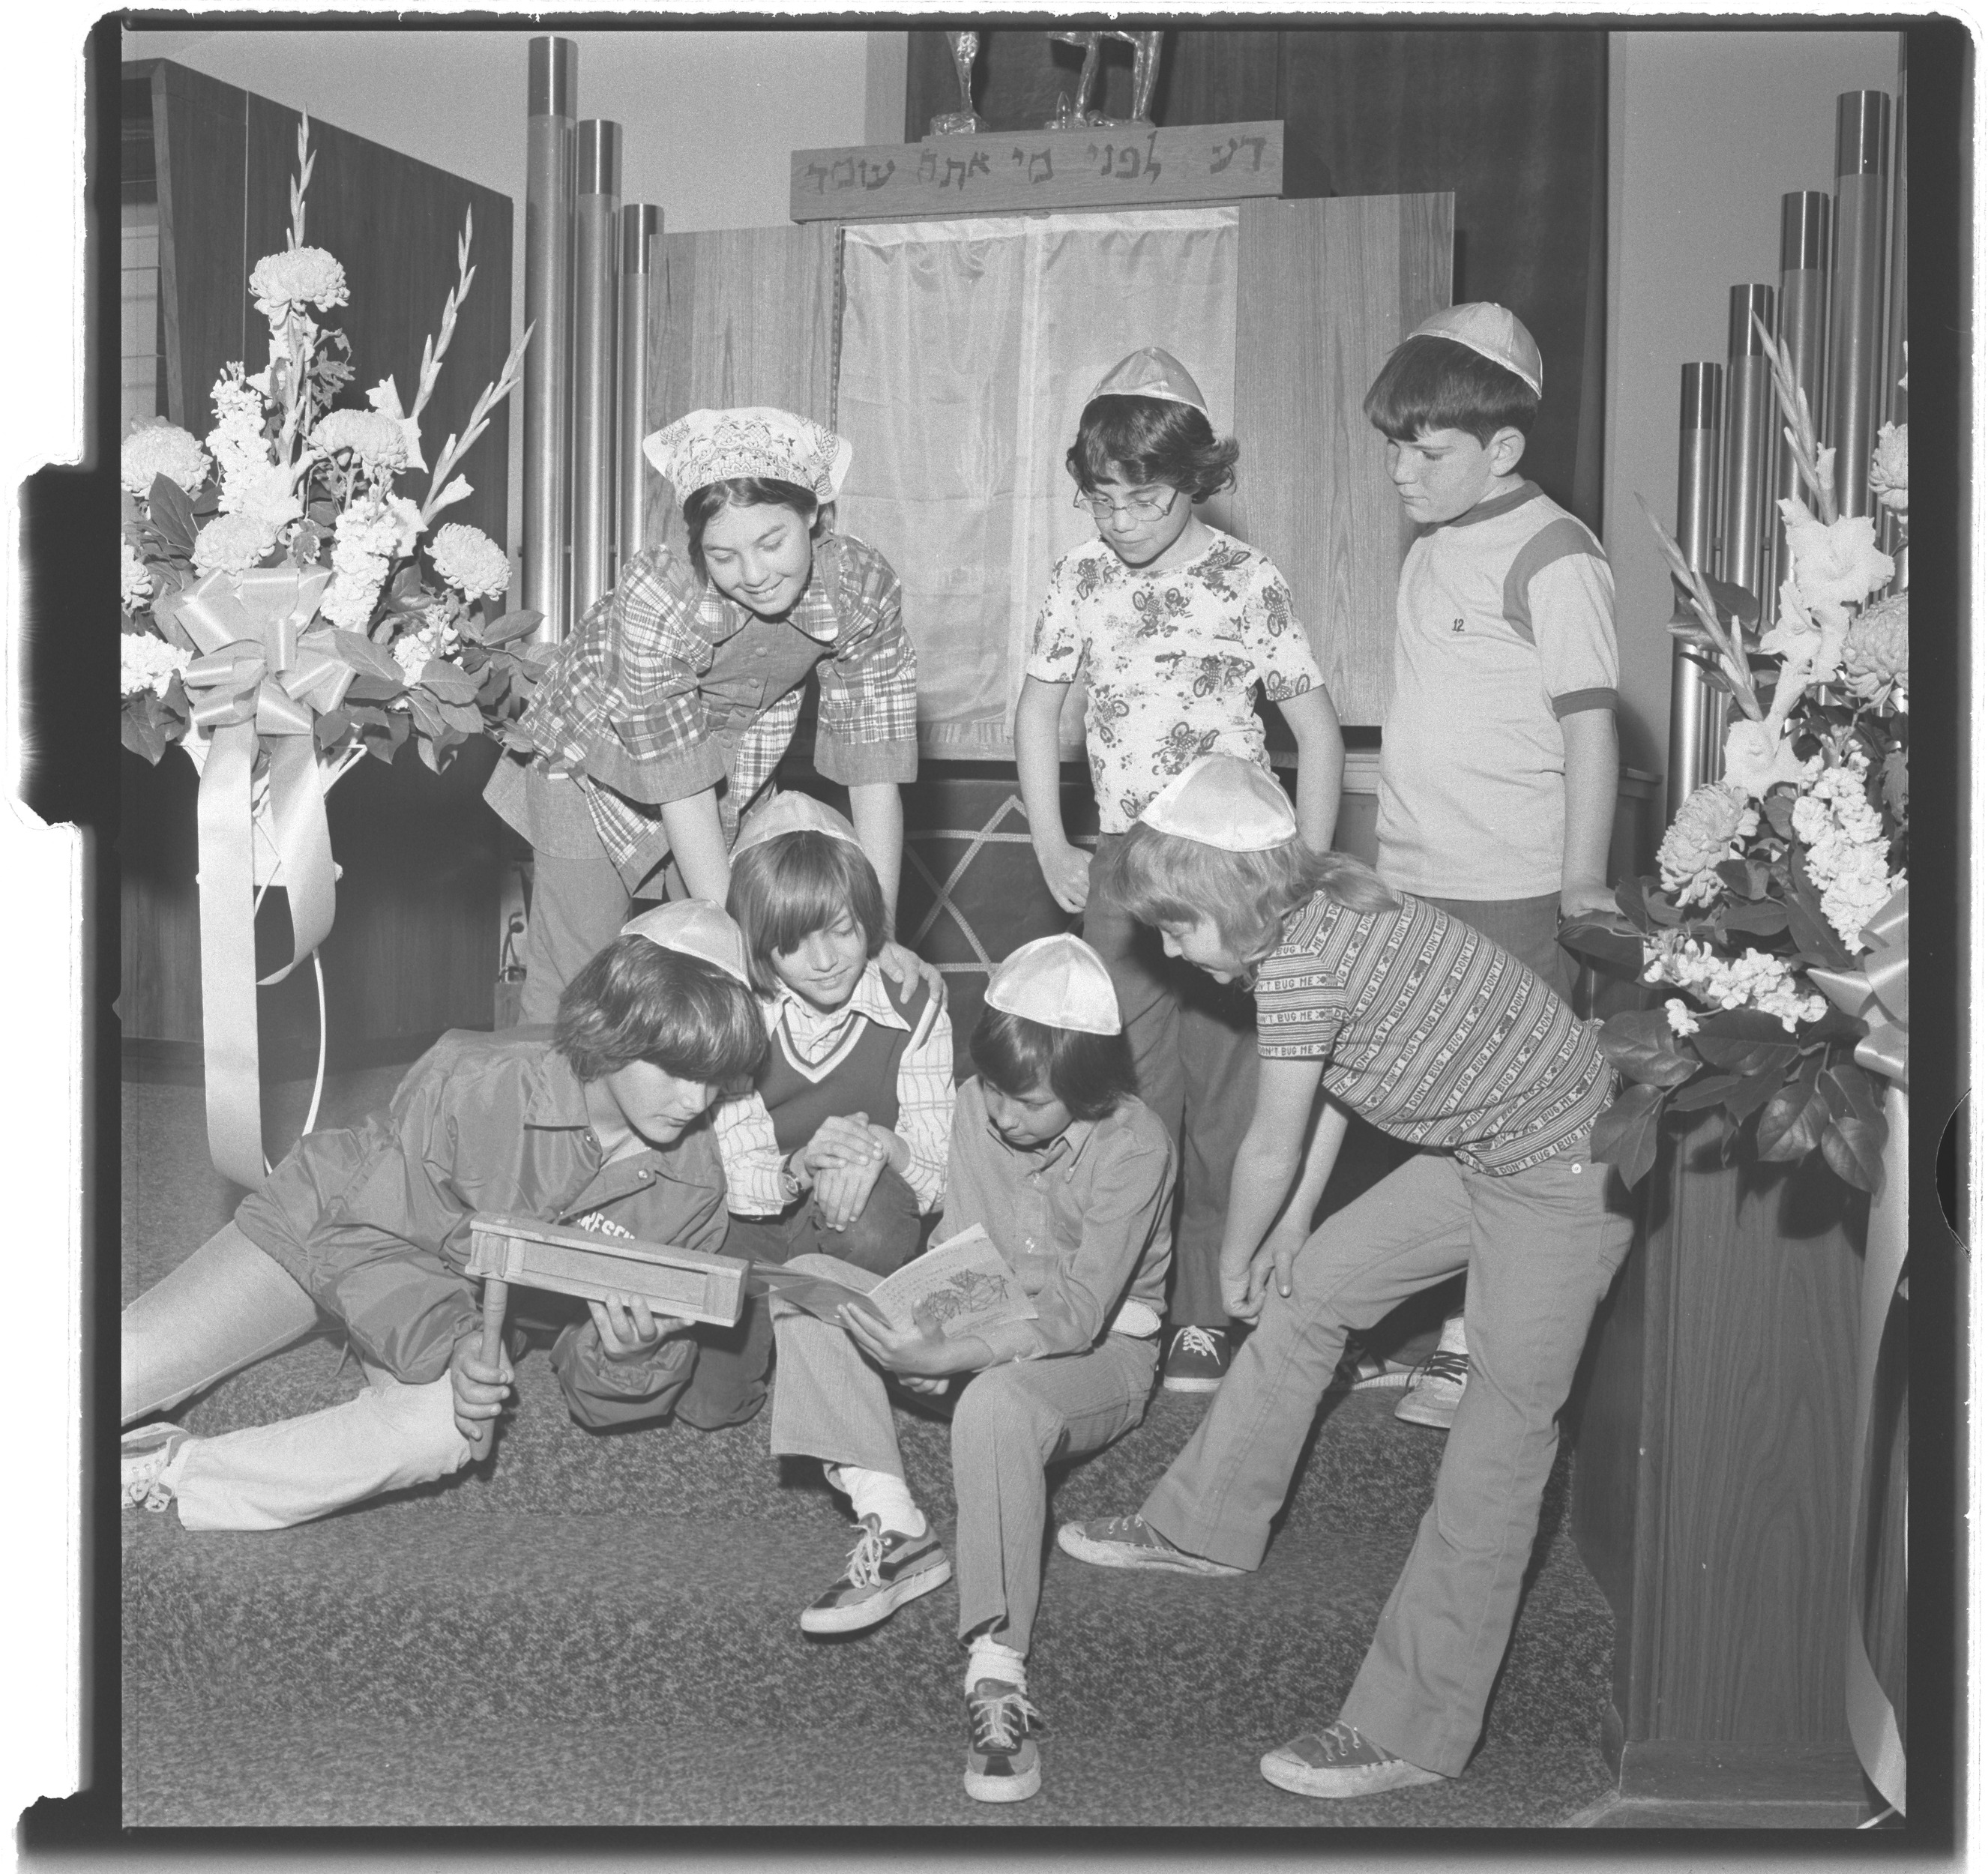 Photographs of Congregation Ner Tamid, image 01